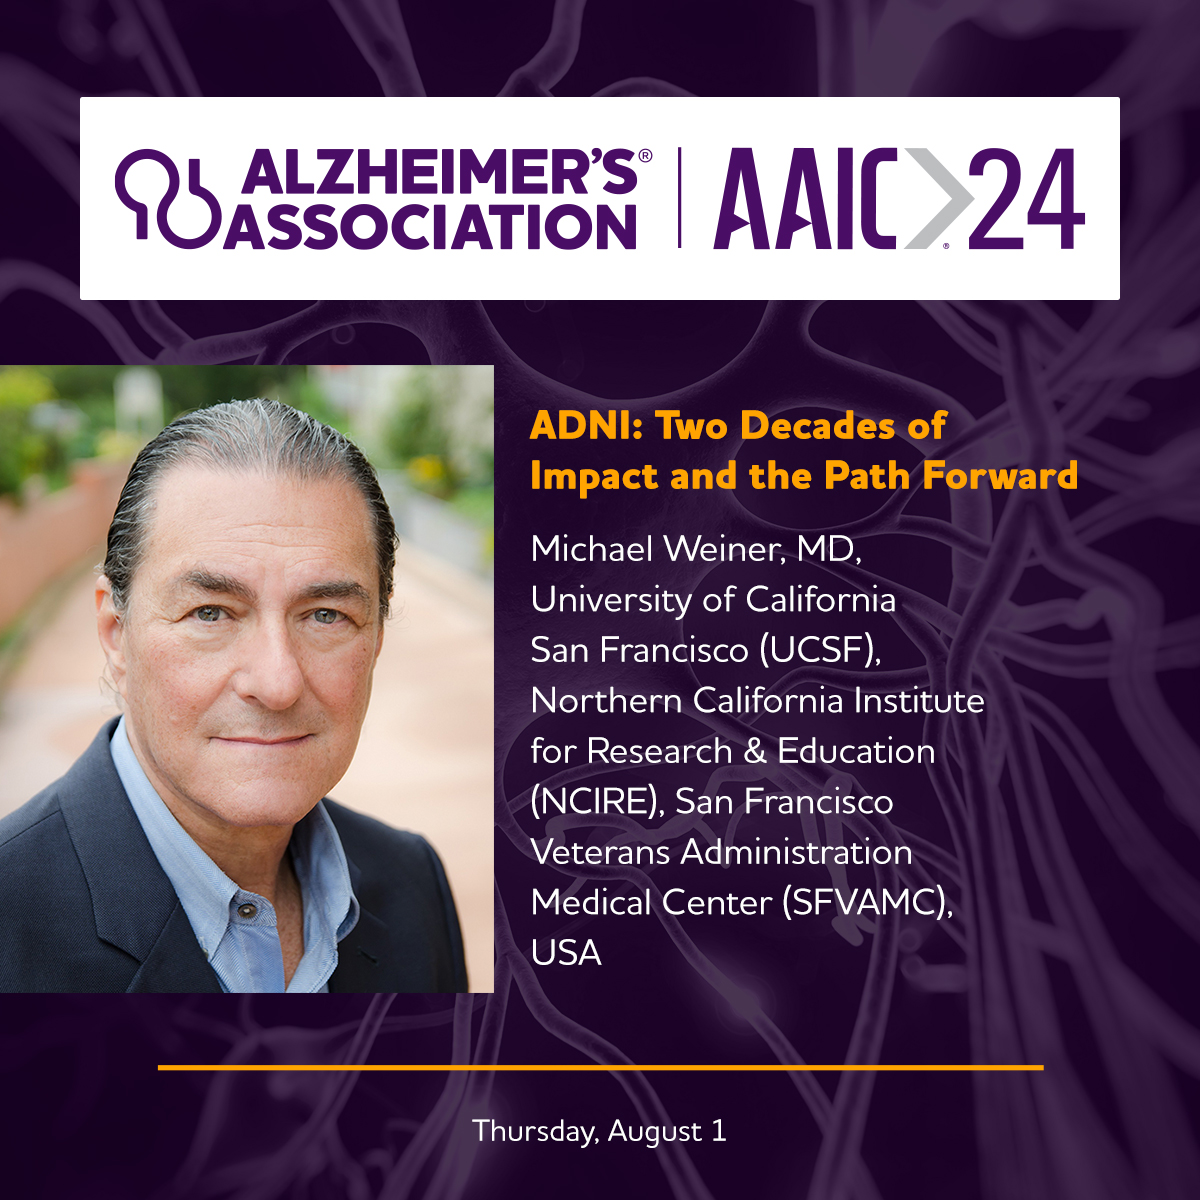 Join Michael Weiner, M.D. (@UCSF, @ncireveterans, @SFVAMC) for his #AAIC24 presentation, “ADNI: Two Decades of Impact and the Path Forward” on Thursday, August 1! Read more about the largest and most influential meeting in dementia science and register: alz.org/aaic24